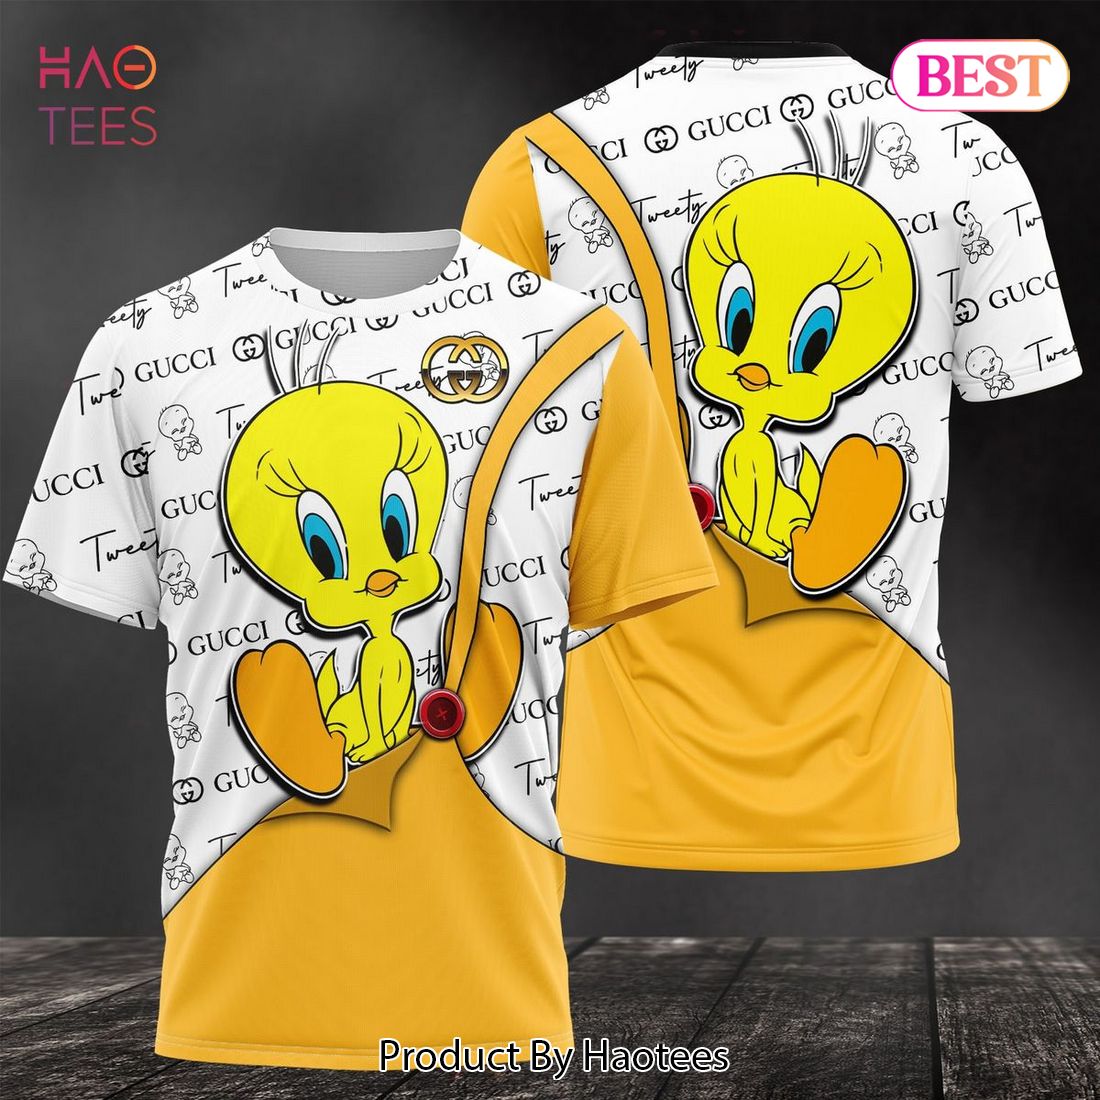 HOT Gucci Vintage Tweety Luxury Brand 3D T-Shirt Limited Edition